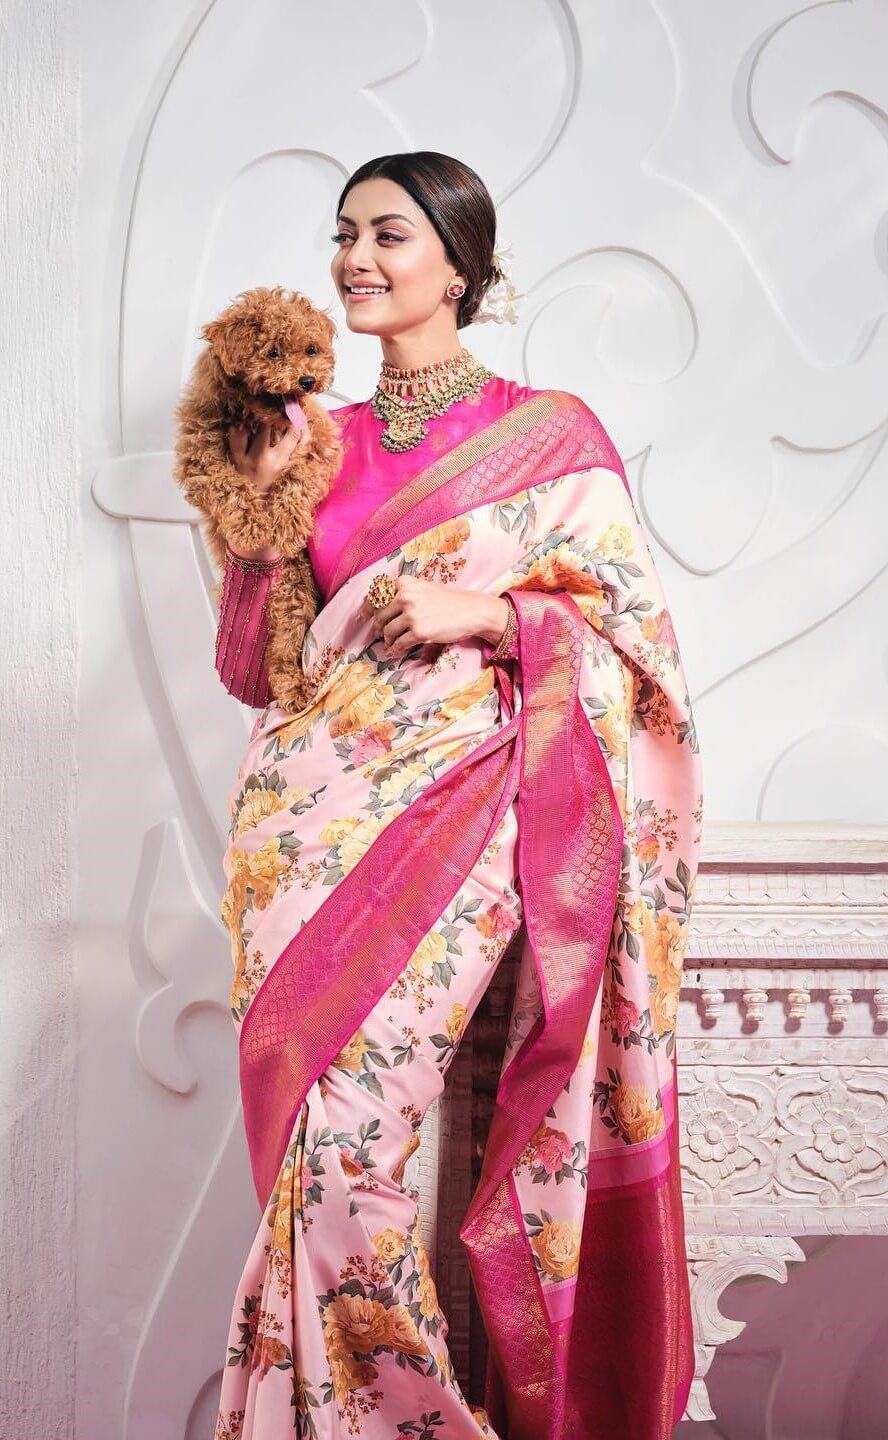 Mamta Mohandas Look Beautiful In Pink & Off White Floral Print Saree With Full Sleeves Embroidered Blouse